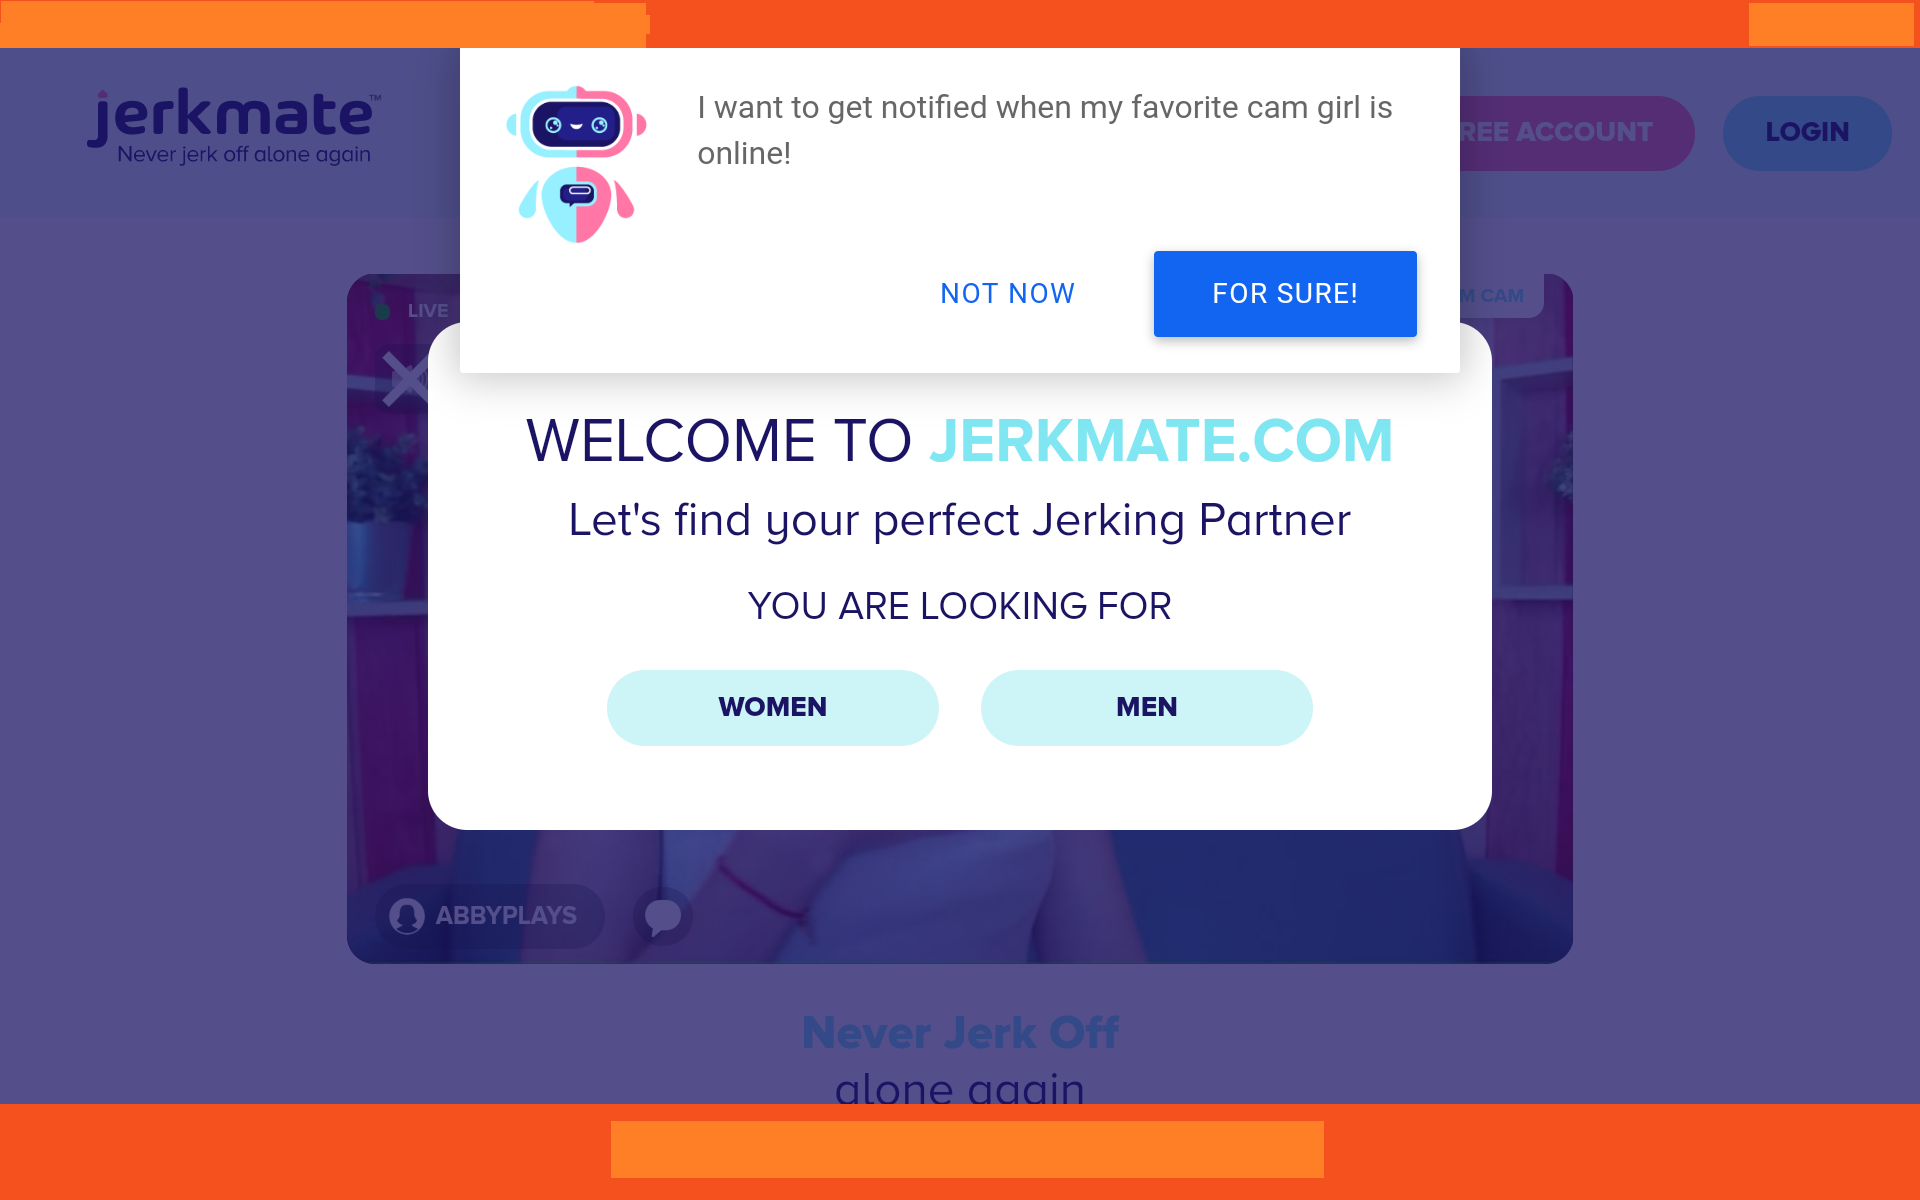 How Does Jerkmate Work? 